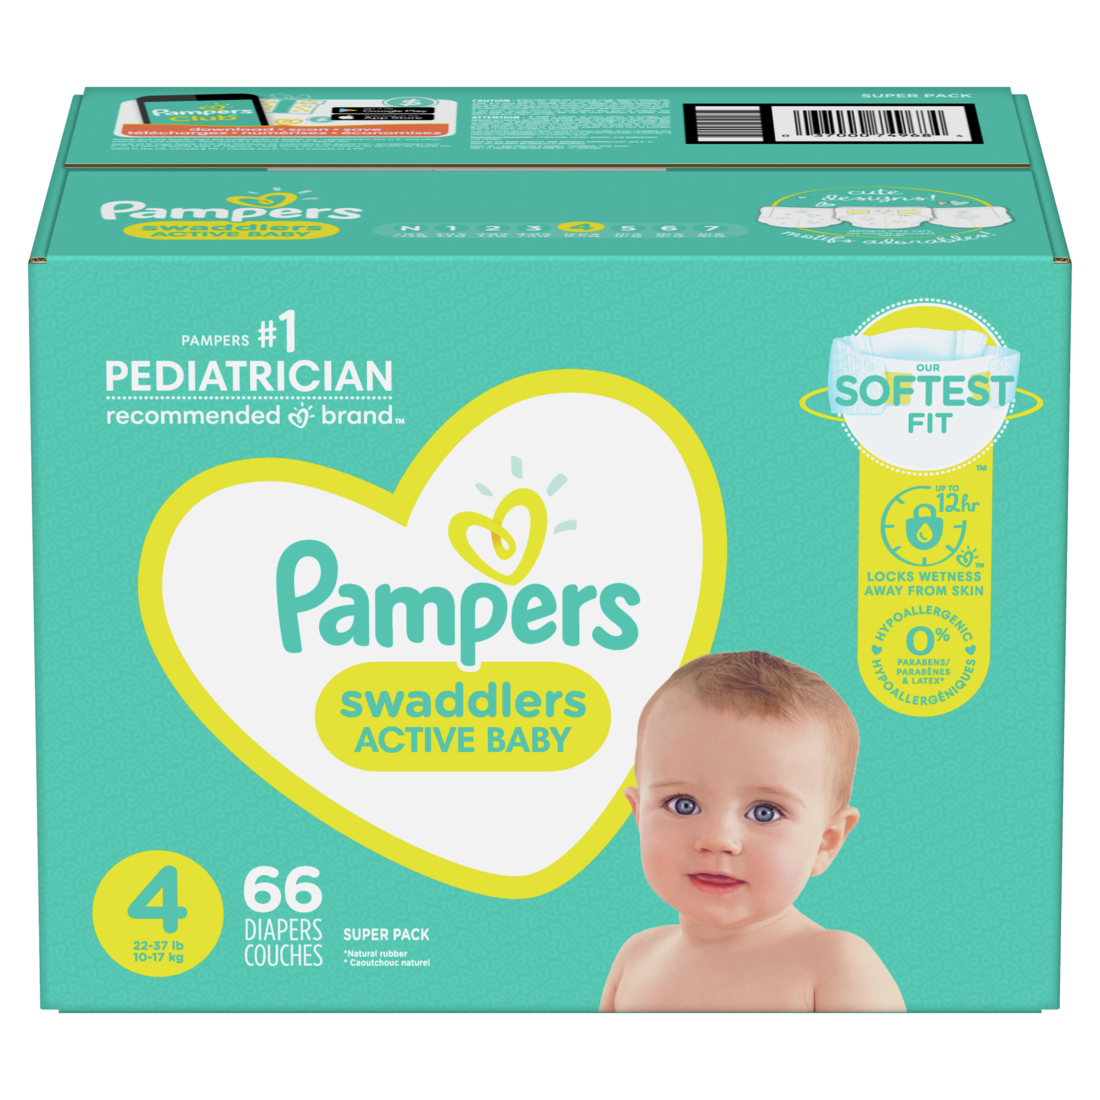 Pampers diapers box